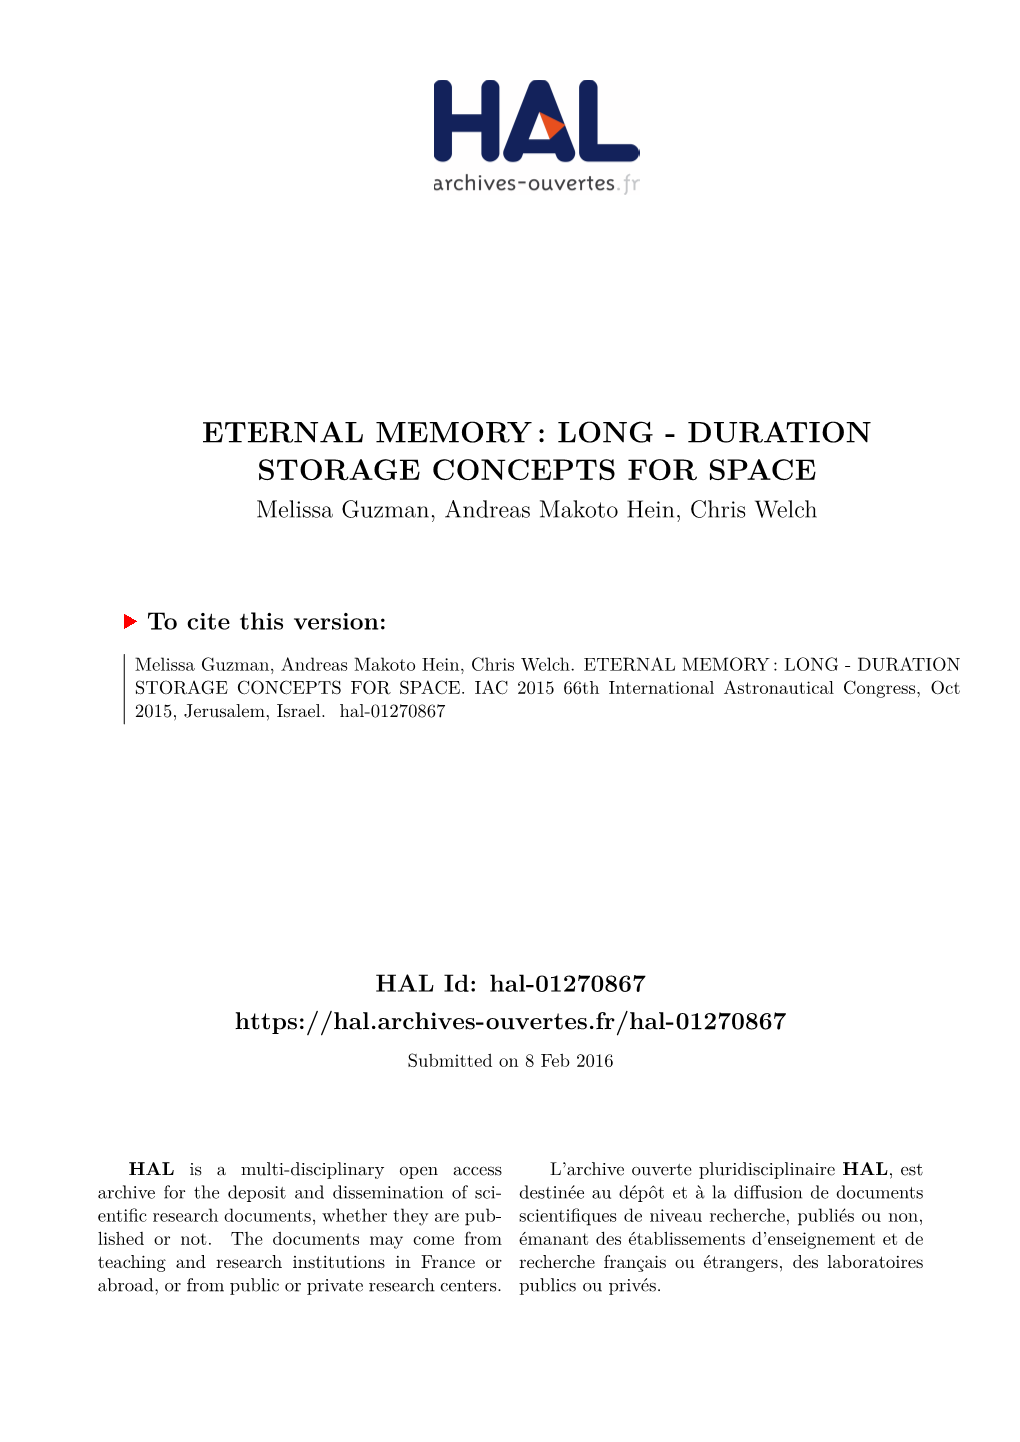 ETERNAL MEMORY : LONG - DURATION STORAGE CONCEPTS for SPACE Melissa Guzman, Andreas Makoto Hein, Chris Welch